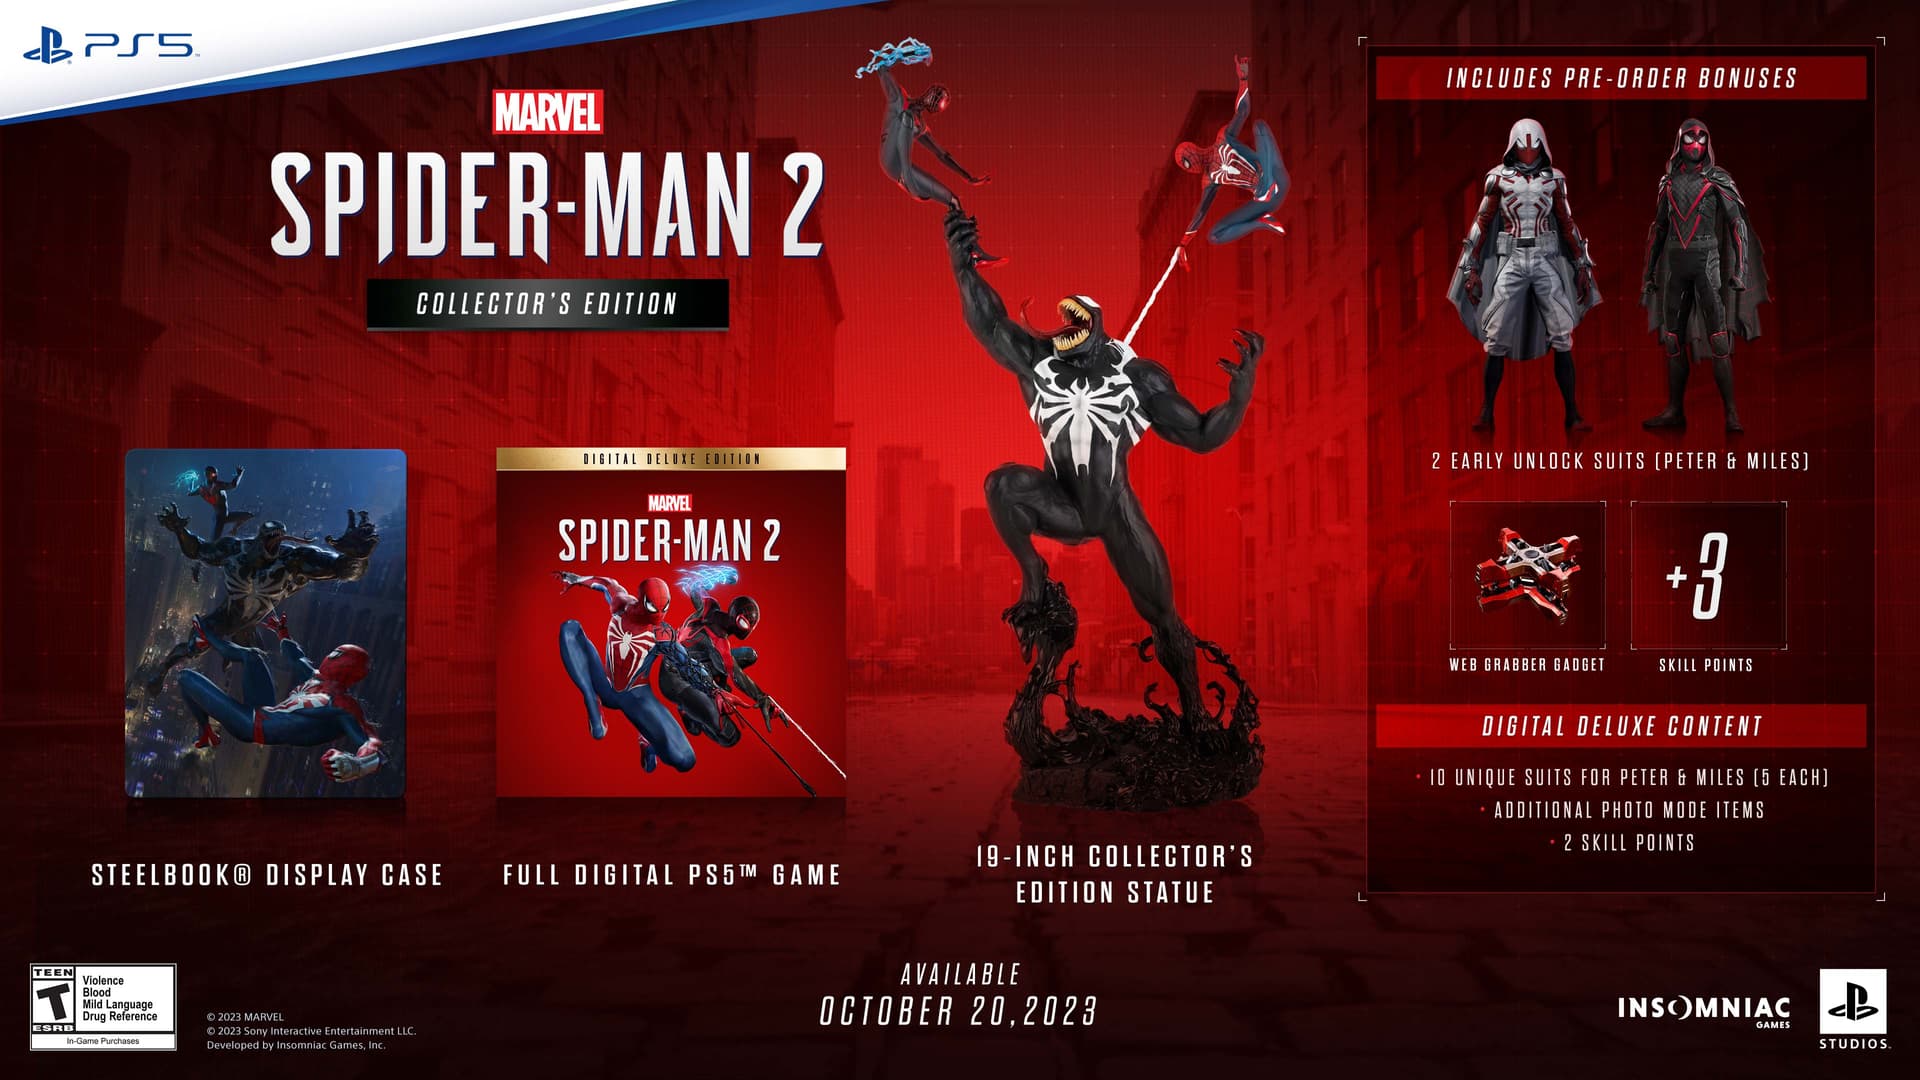 Marvel's Spider-Man 2 Collector's Edition